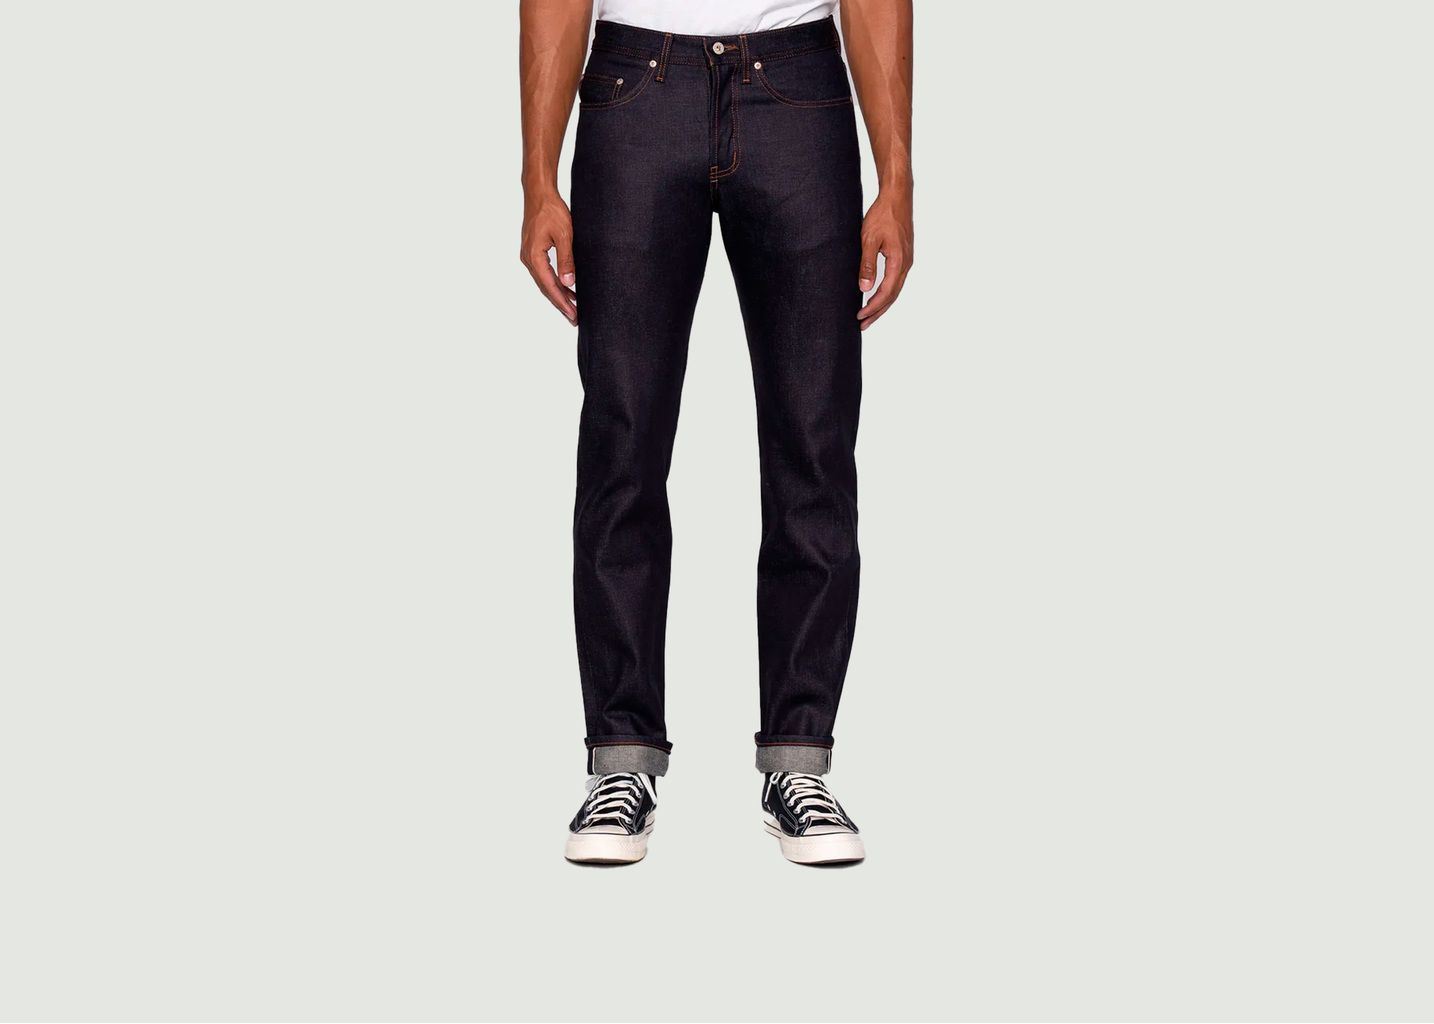 Jean Weird Guy Sea Island Cotton Selvedge - Naked and Famous